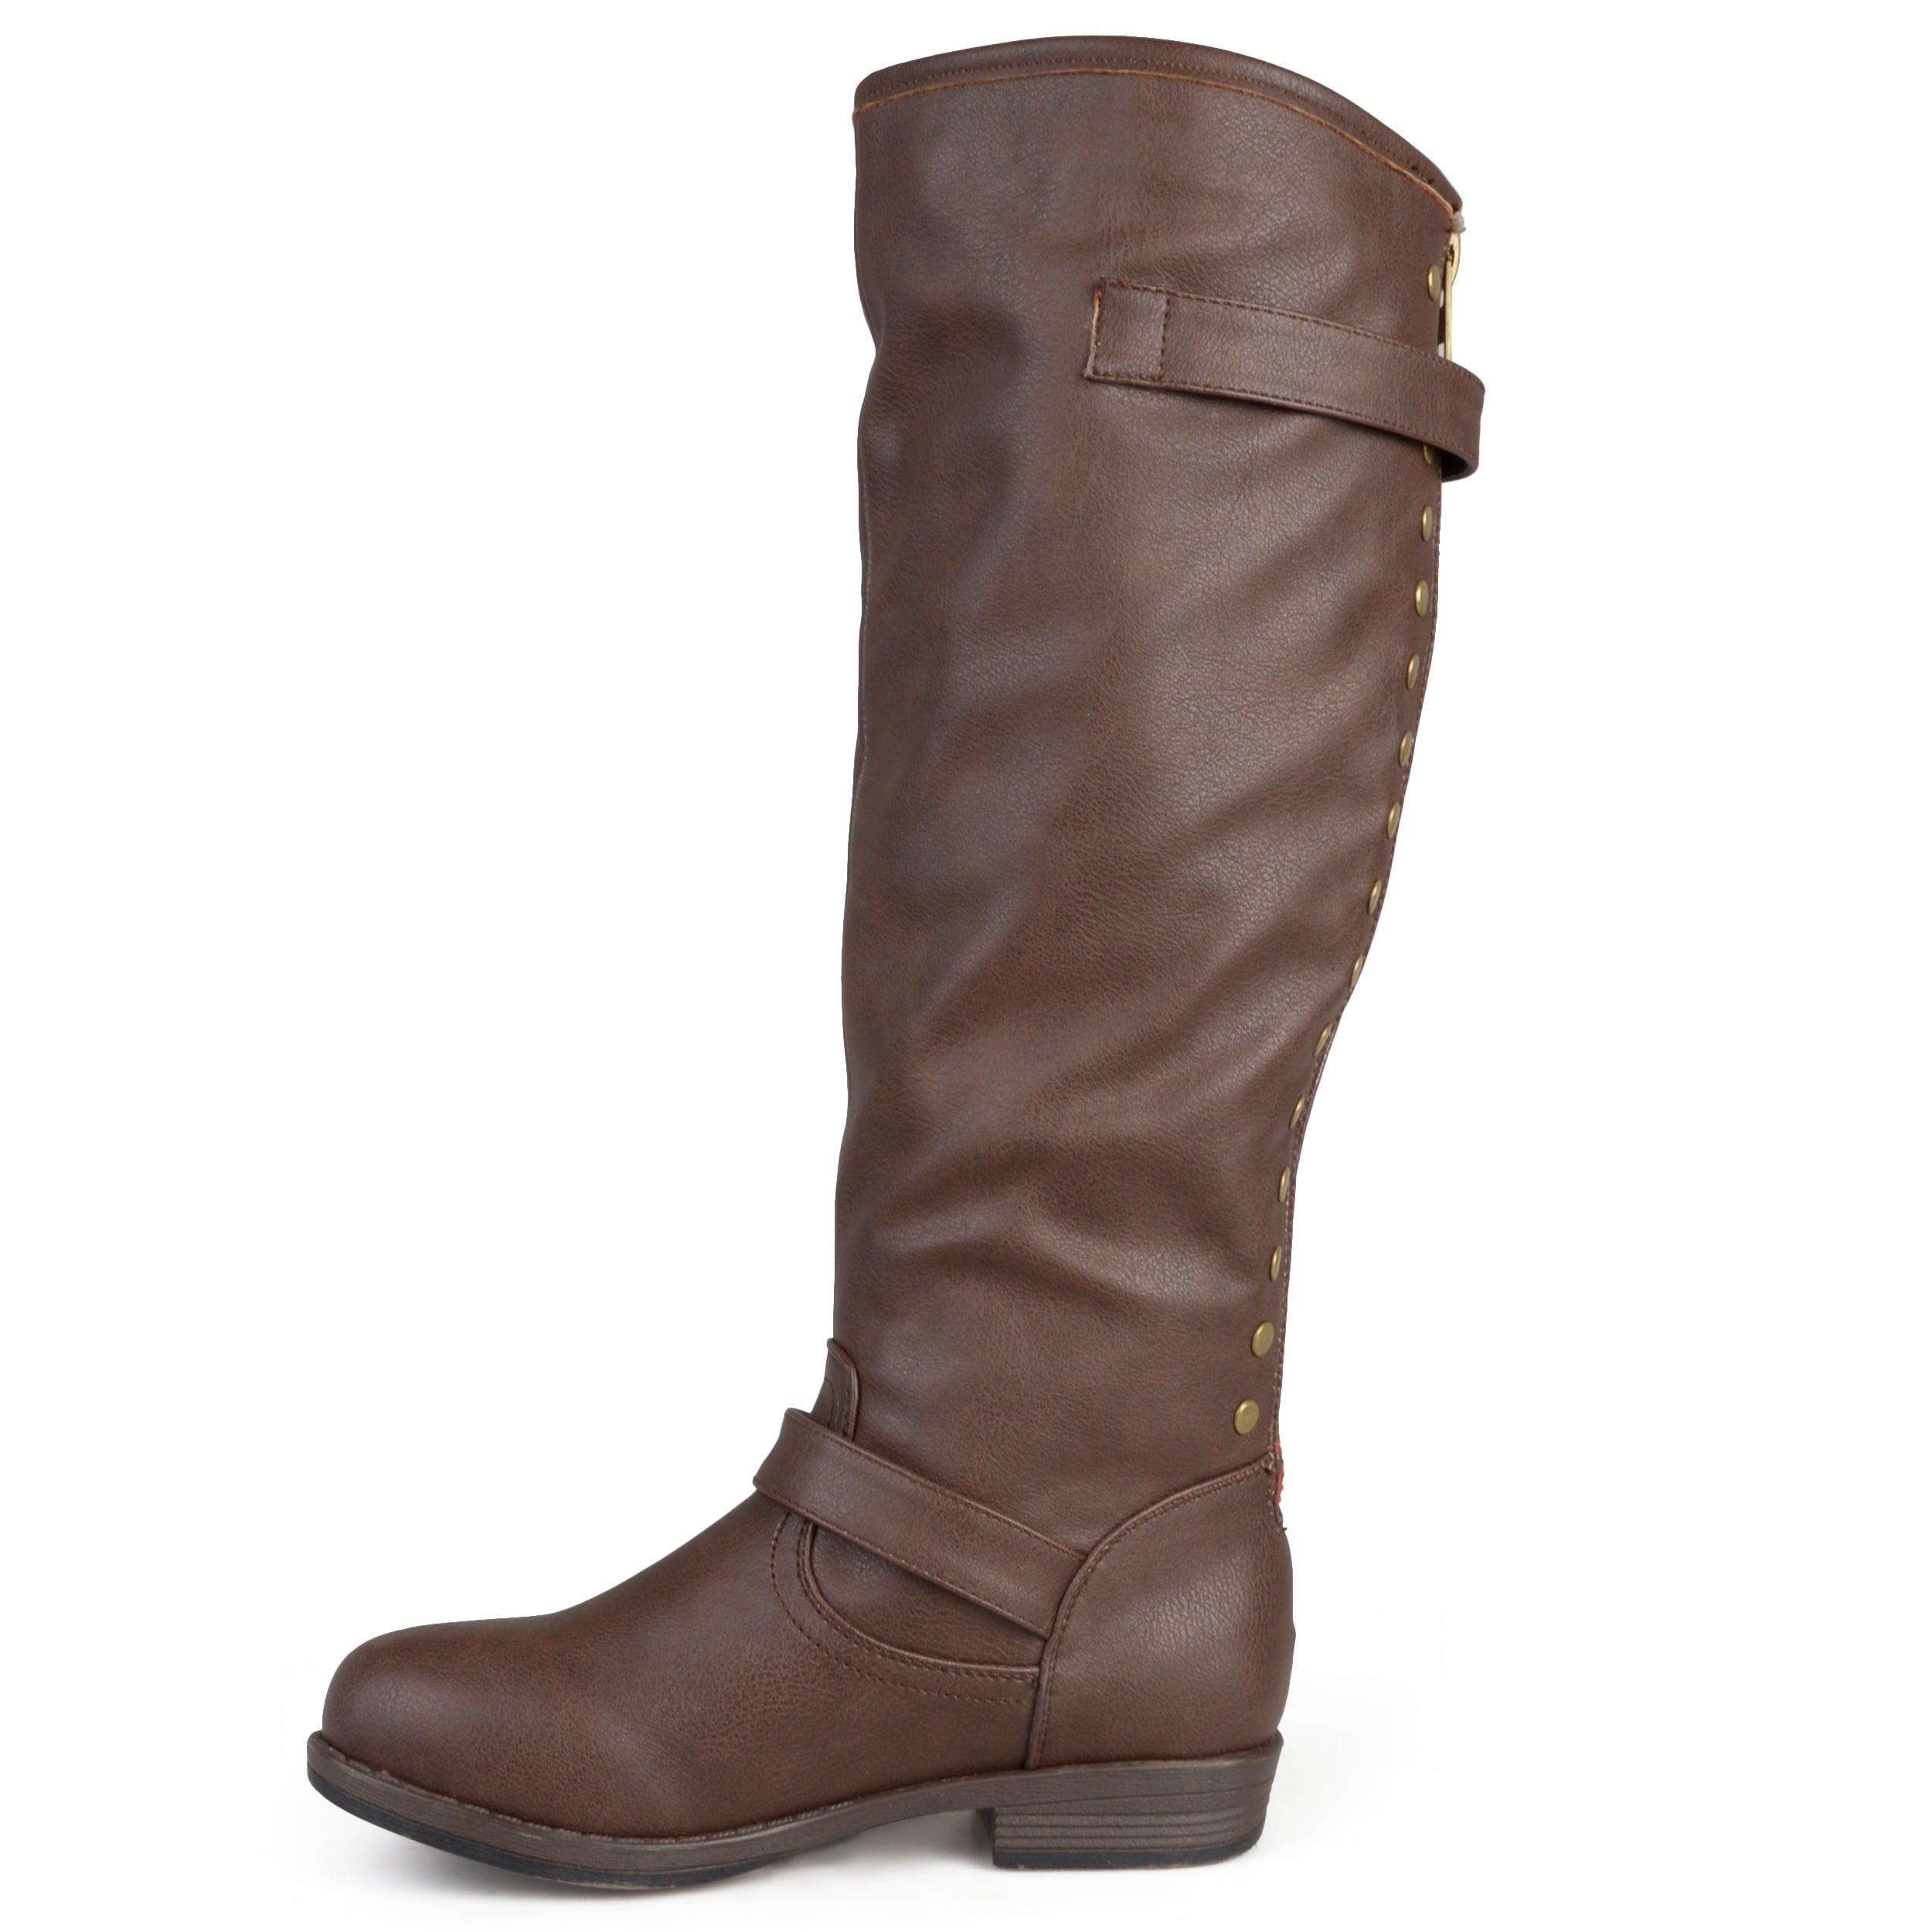 brown boots with red zipper